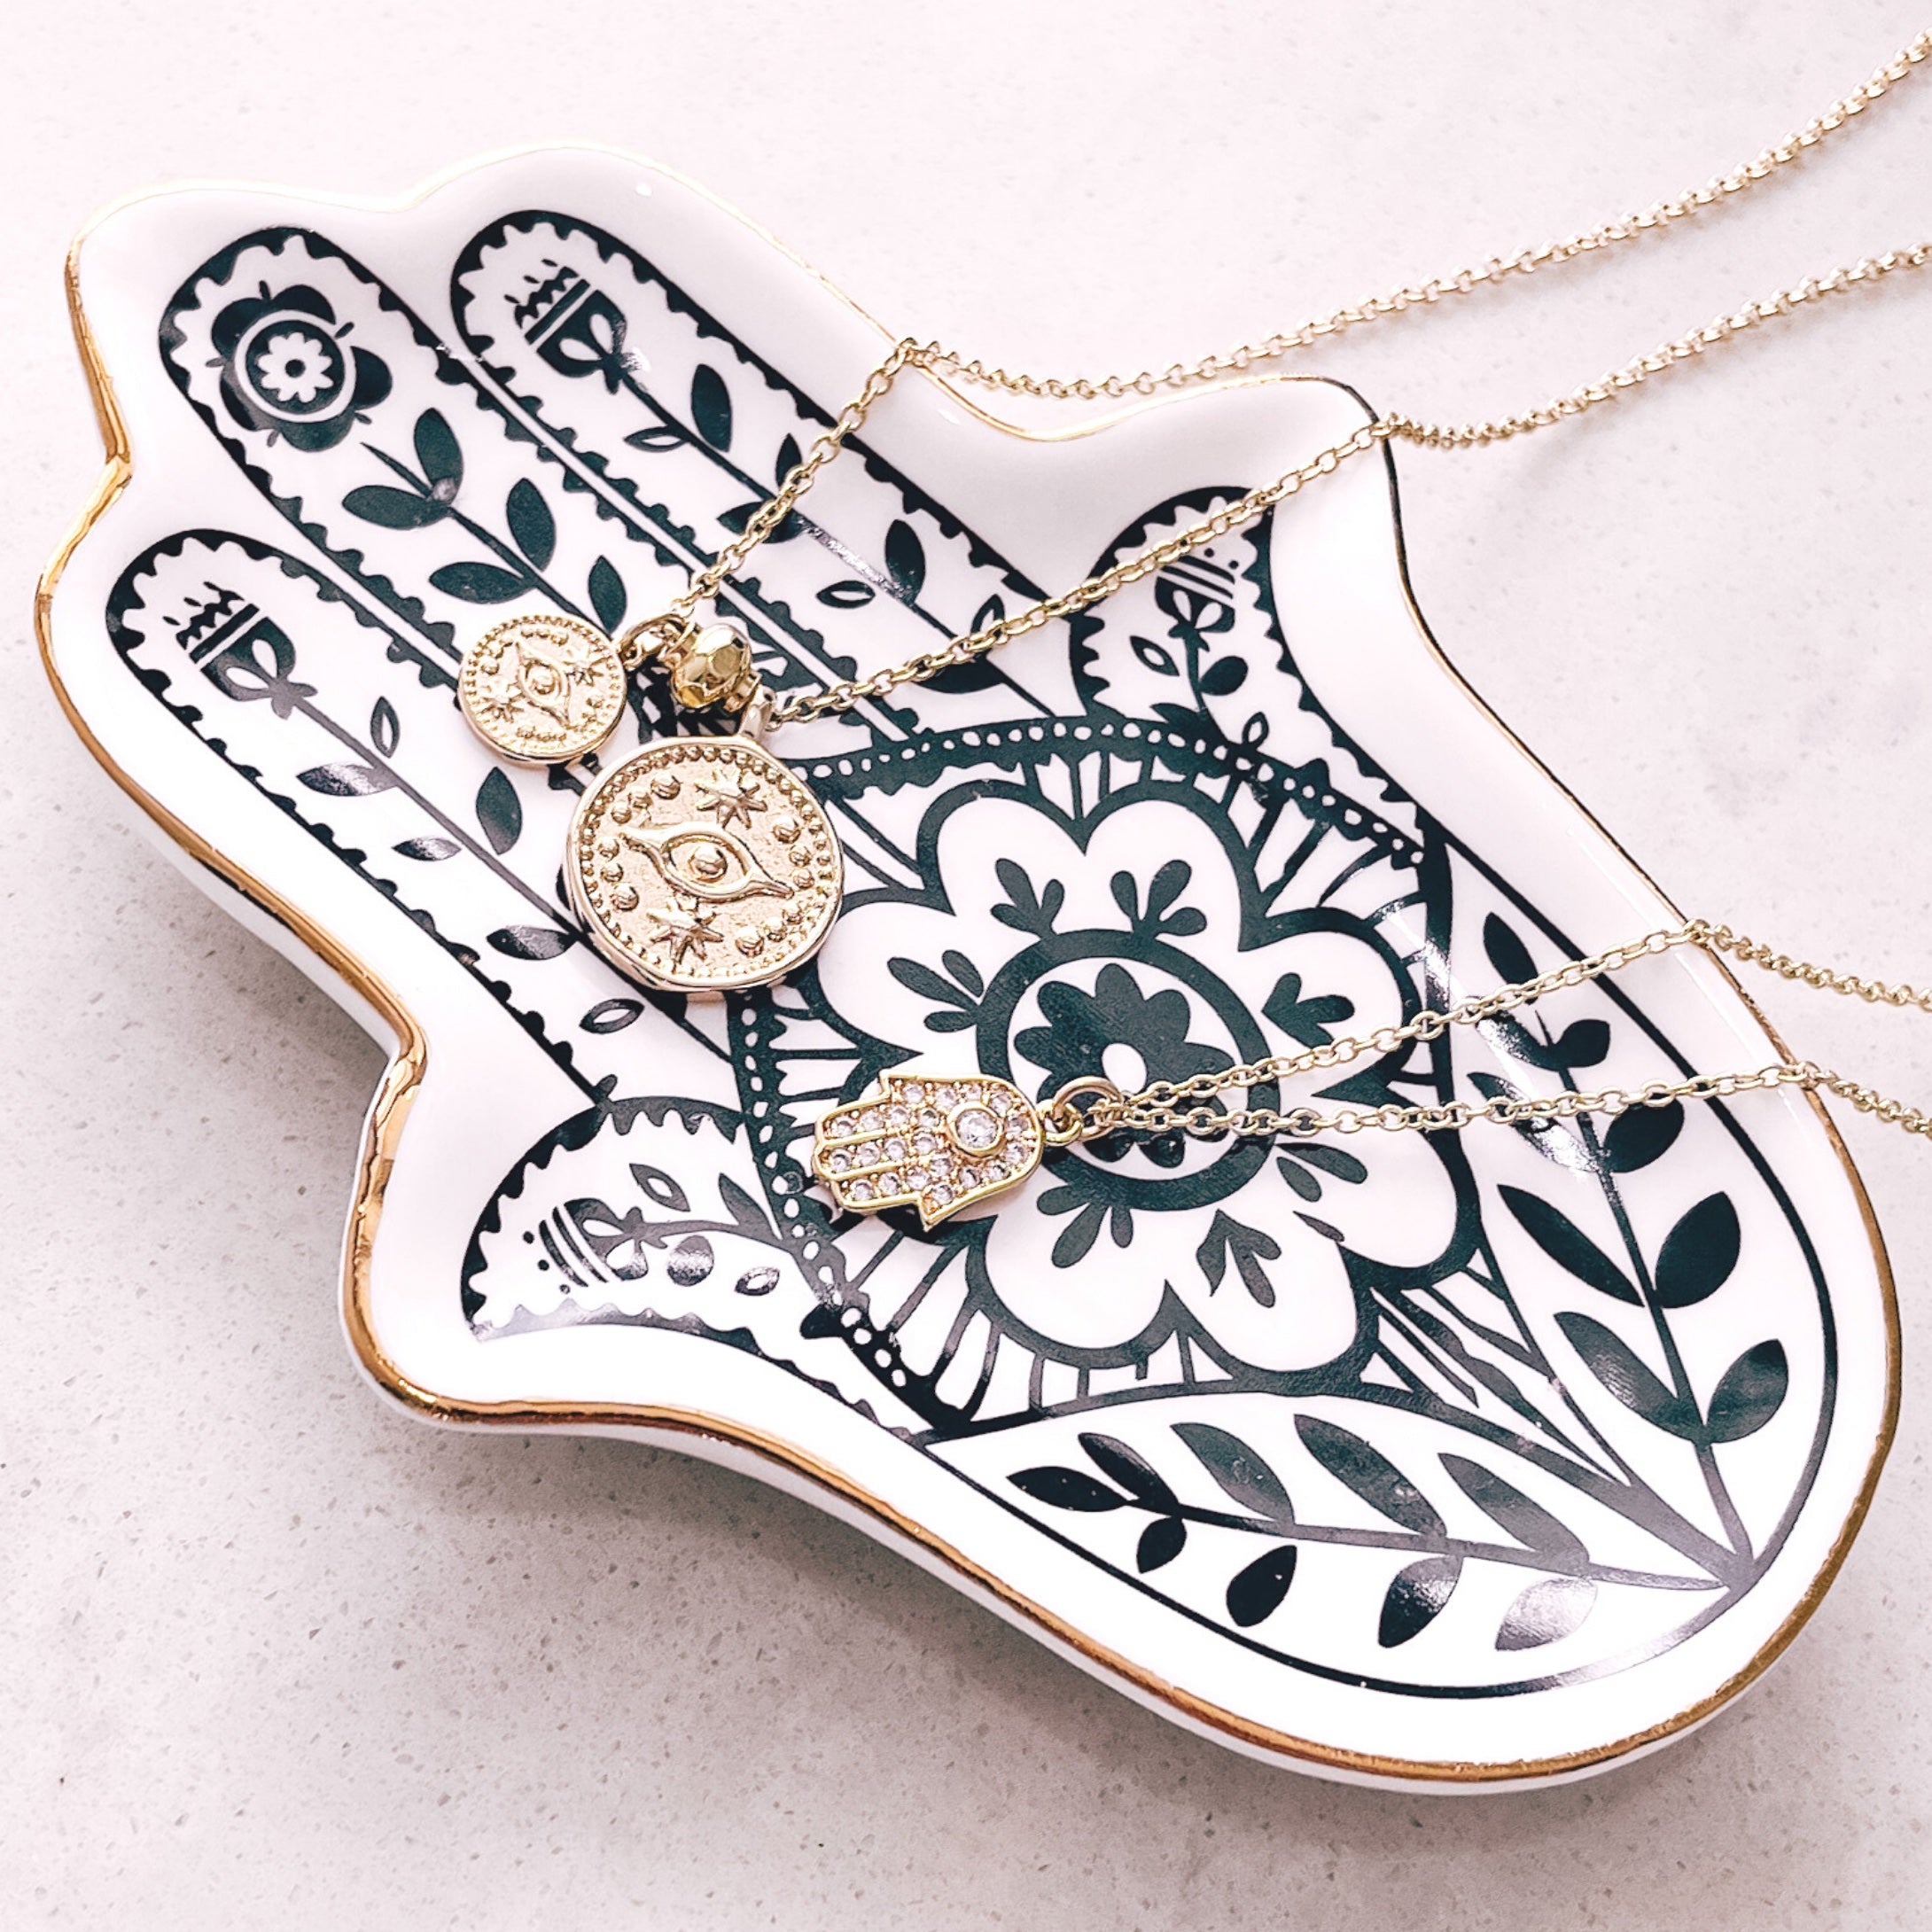 Hamsa Hand jewellery trinket tray from Australian jewellery brand AW Boutique.  Pictured with gold necklaces draped across the tray.